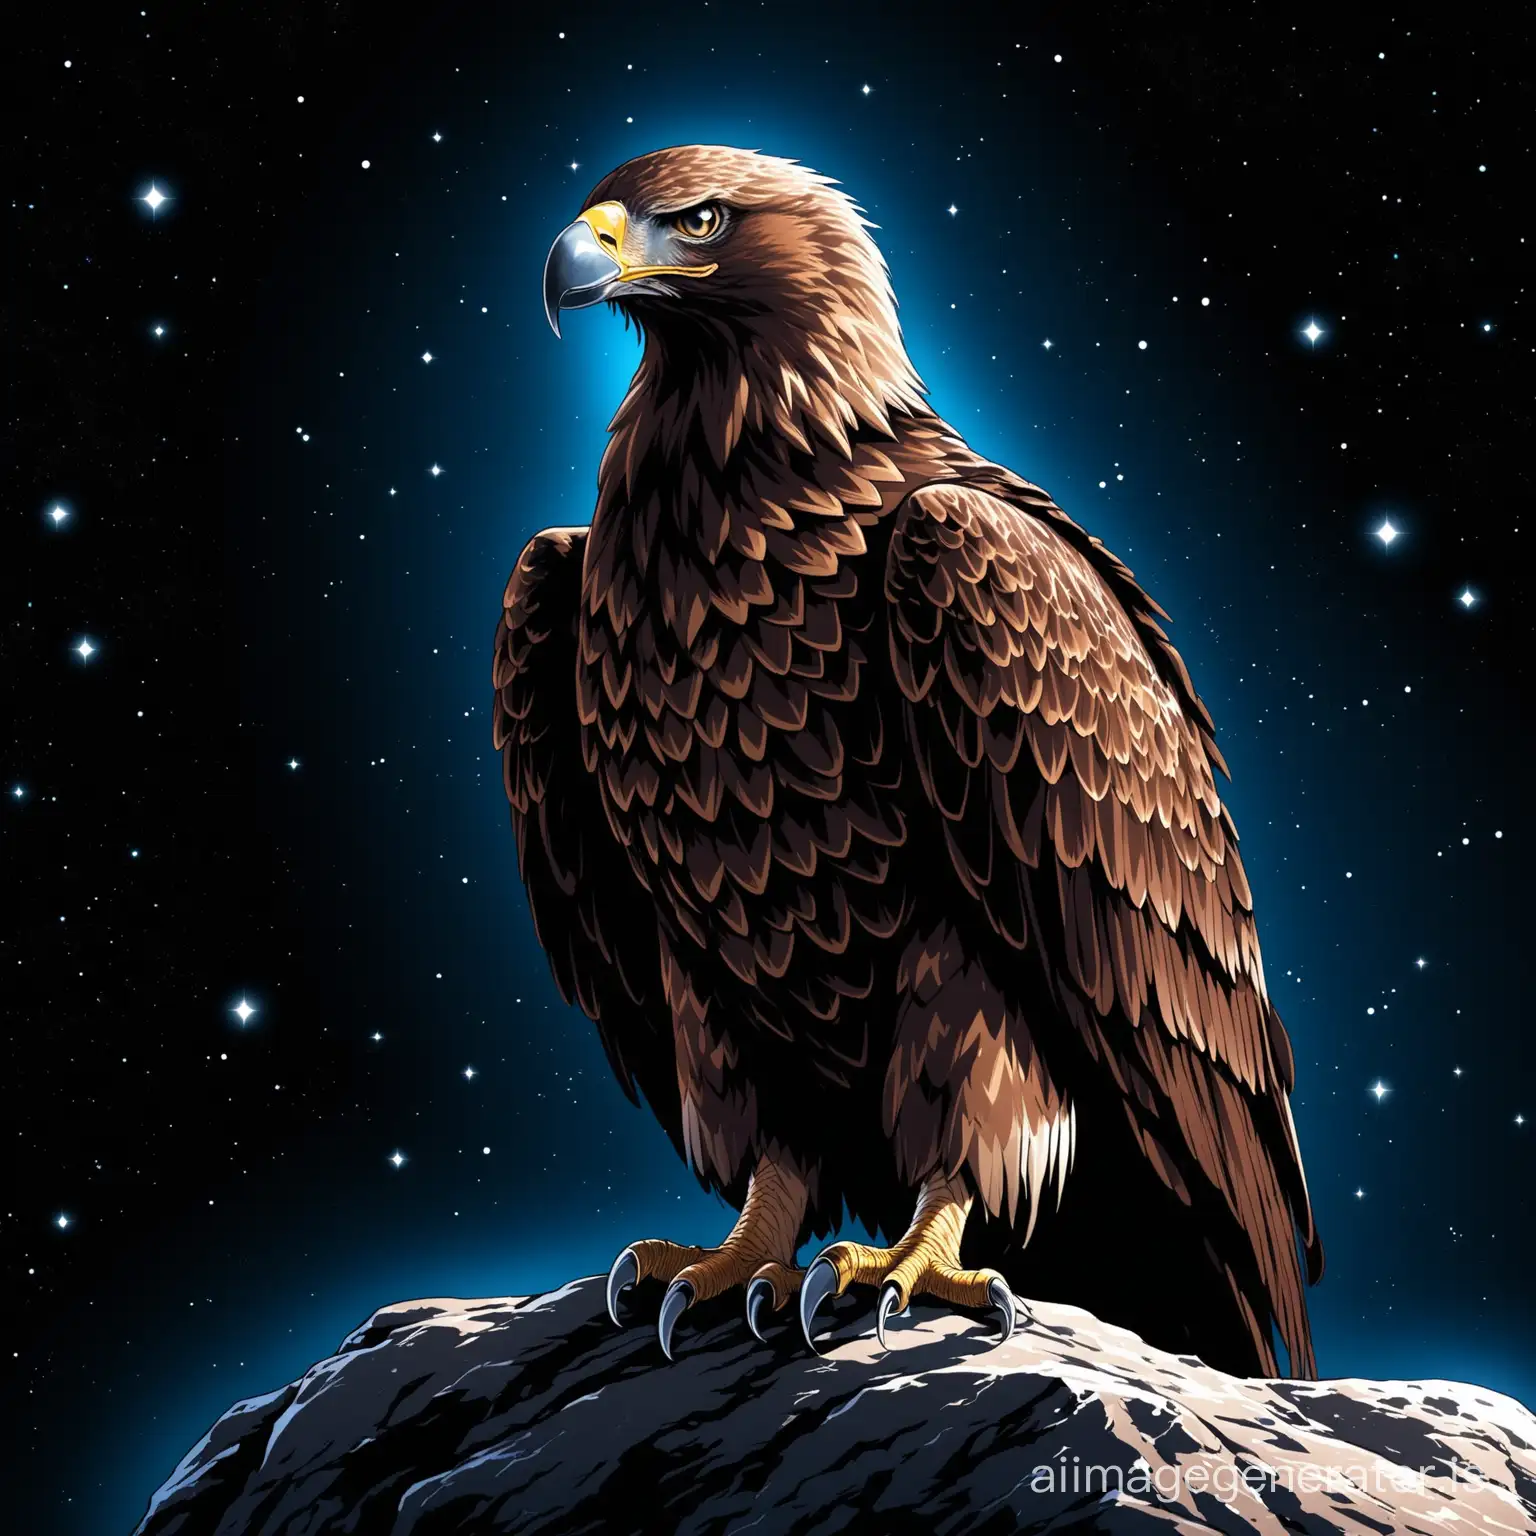 Majestic-Brown-Eagle-Perched-on-Rocky-Outcrop-with-Detailed-Feathers-and-Carefully-Crafted-Lighting